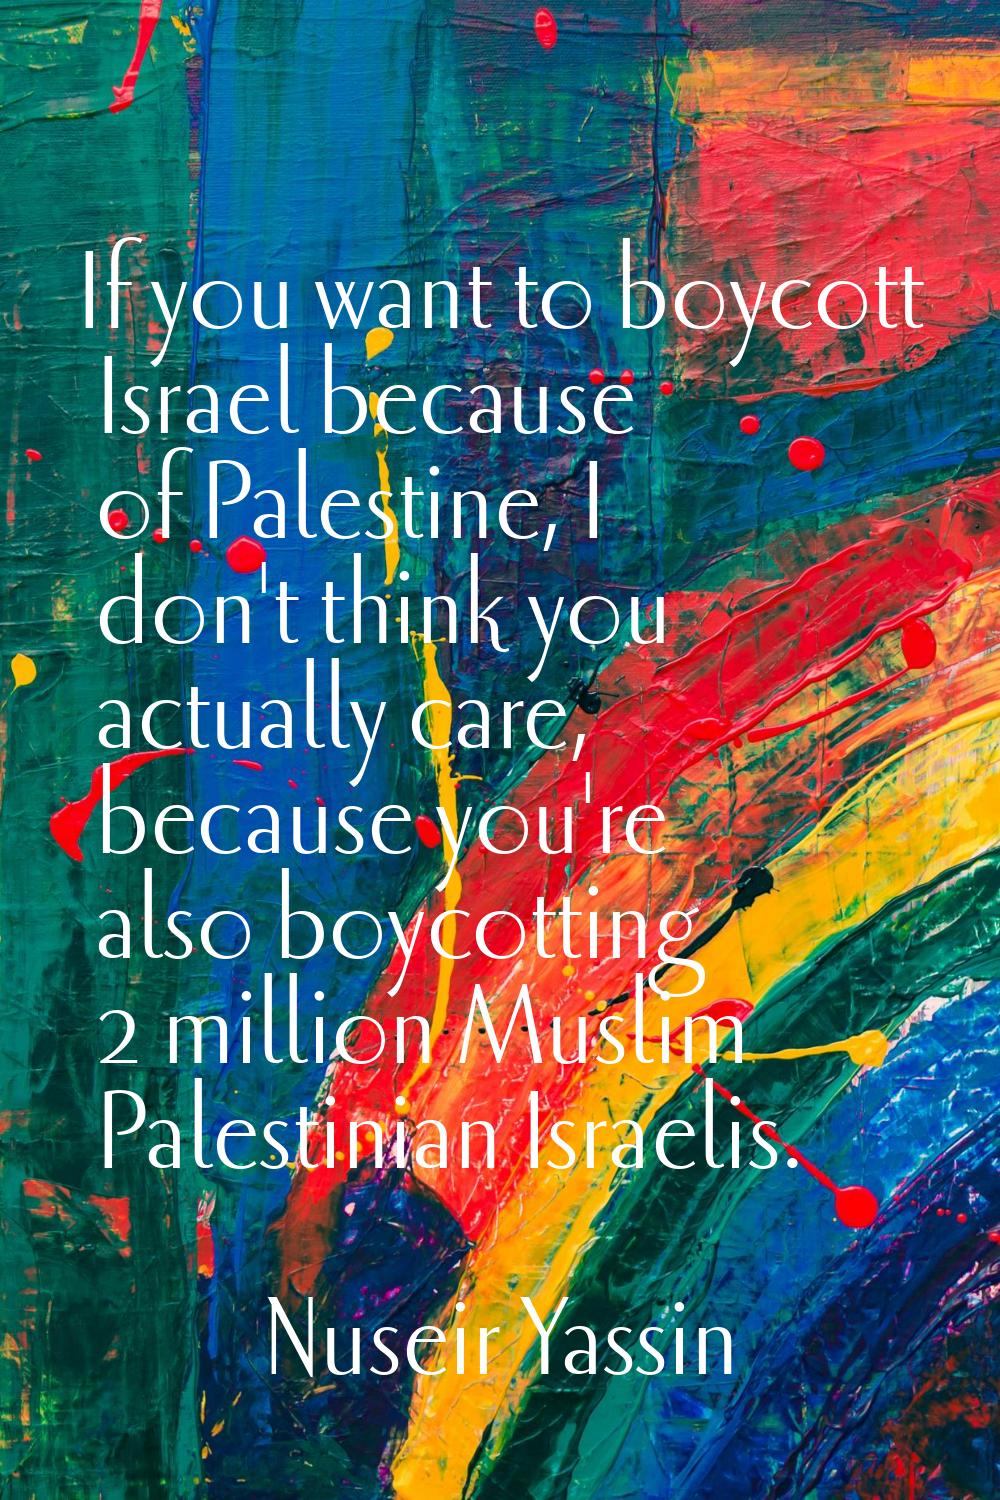 If you want to boycott Israel because of Palestine, I don't think you actually care, because you're